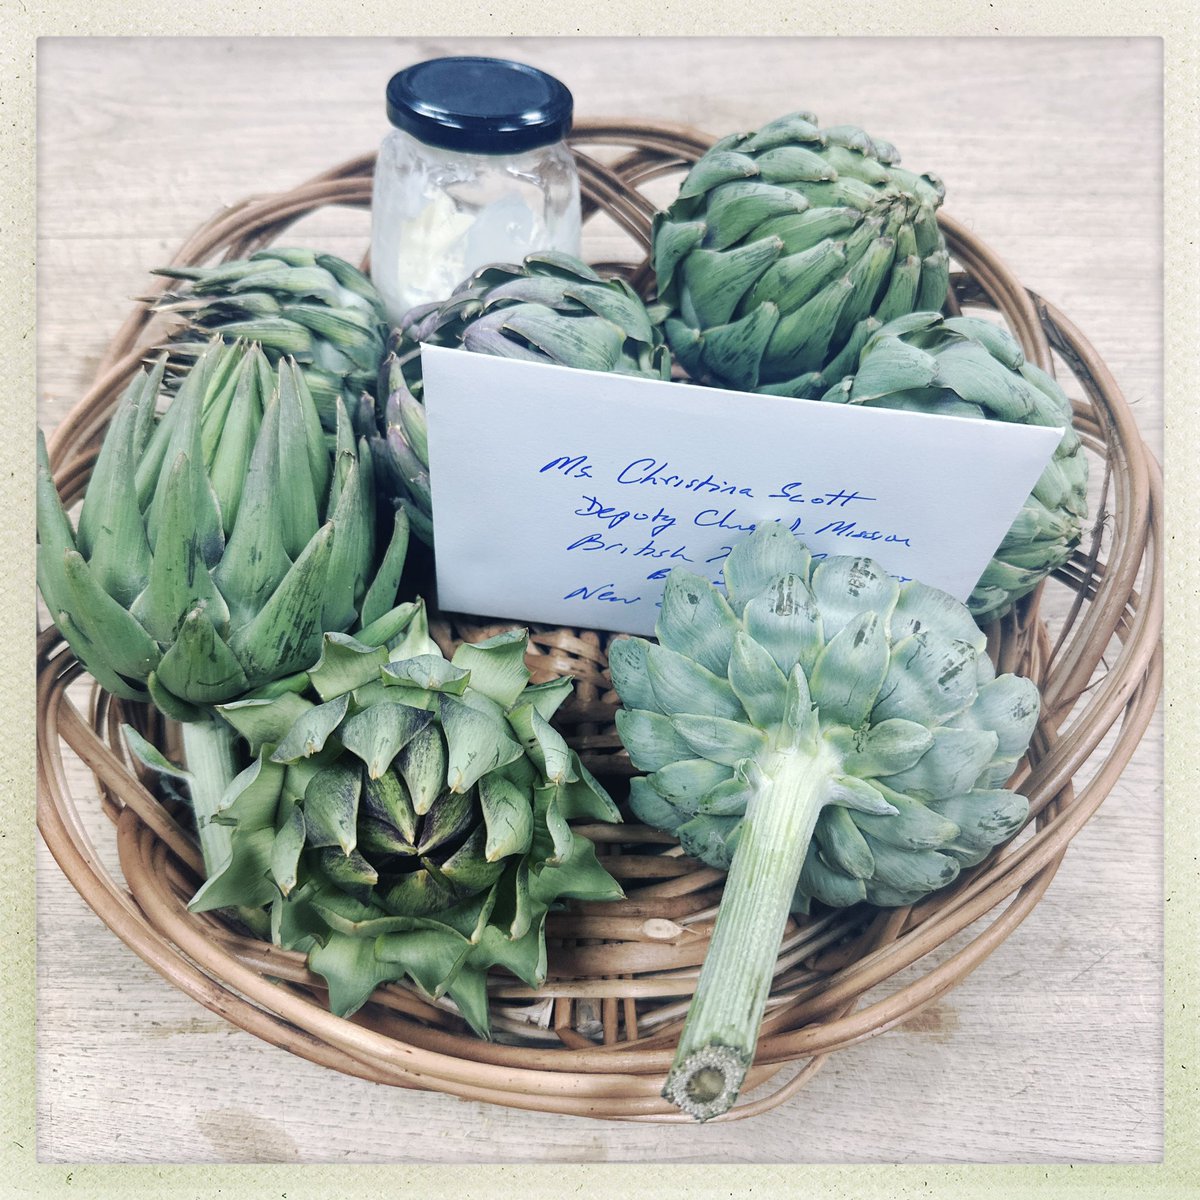 Lovely delivery from generous Indian friends who grow their own artichokes…. This, people, is the way to my heart 💚